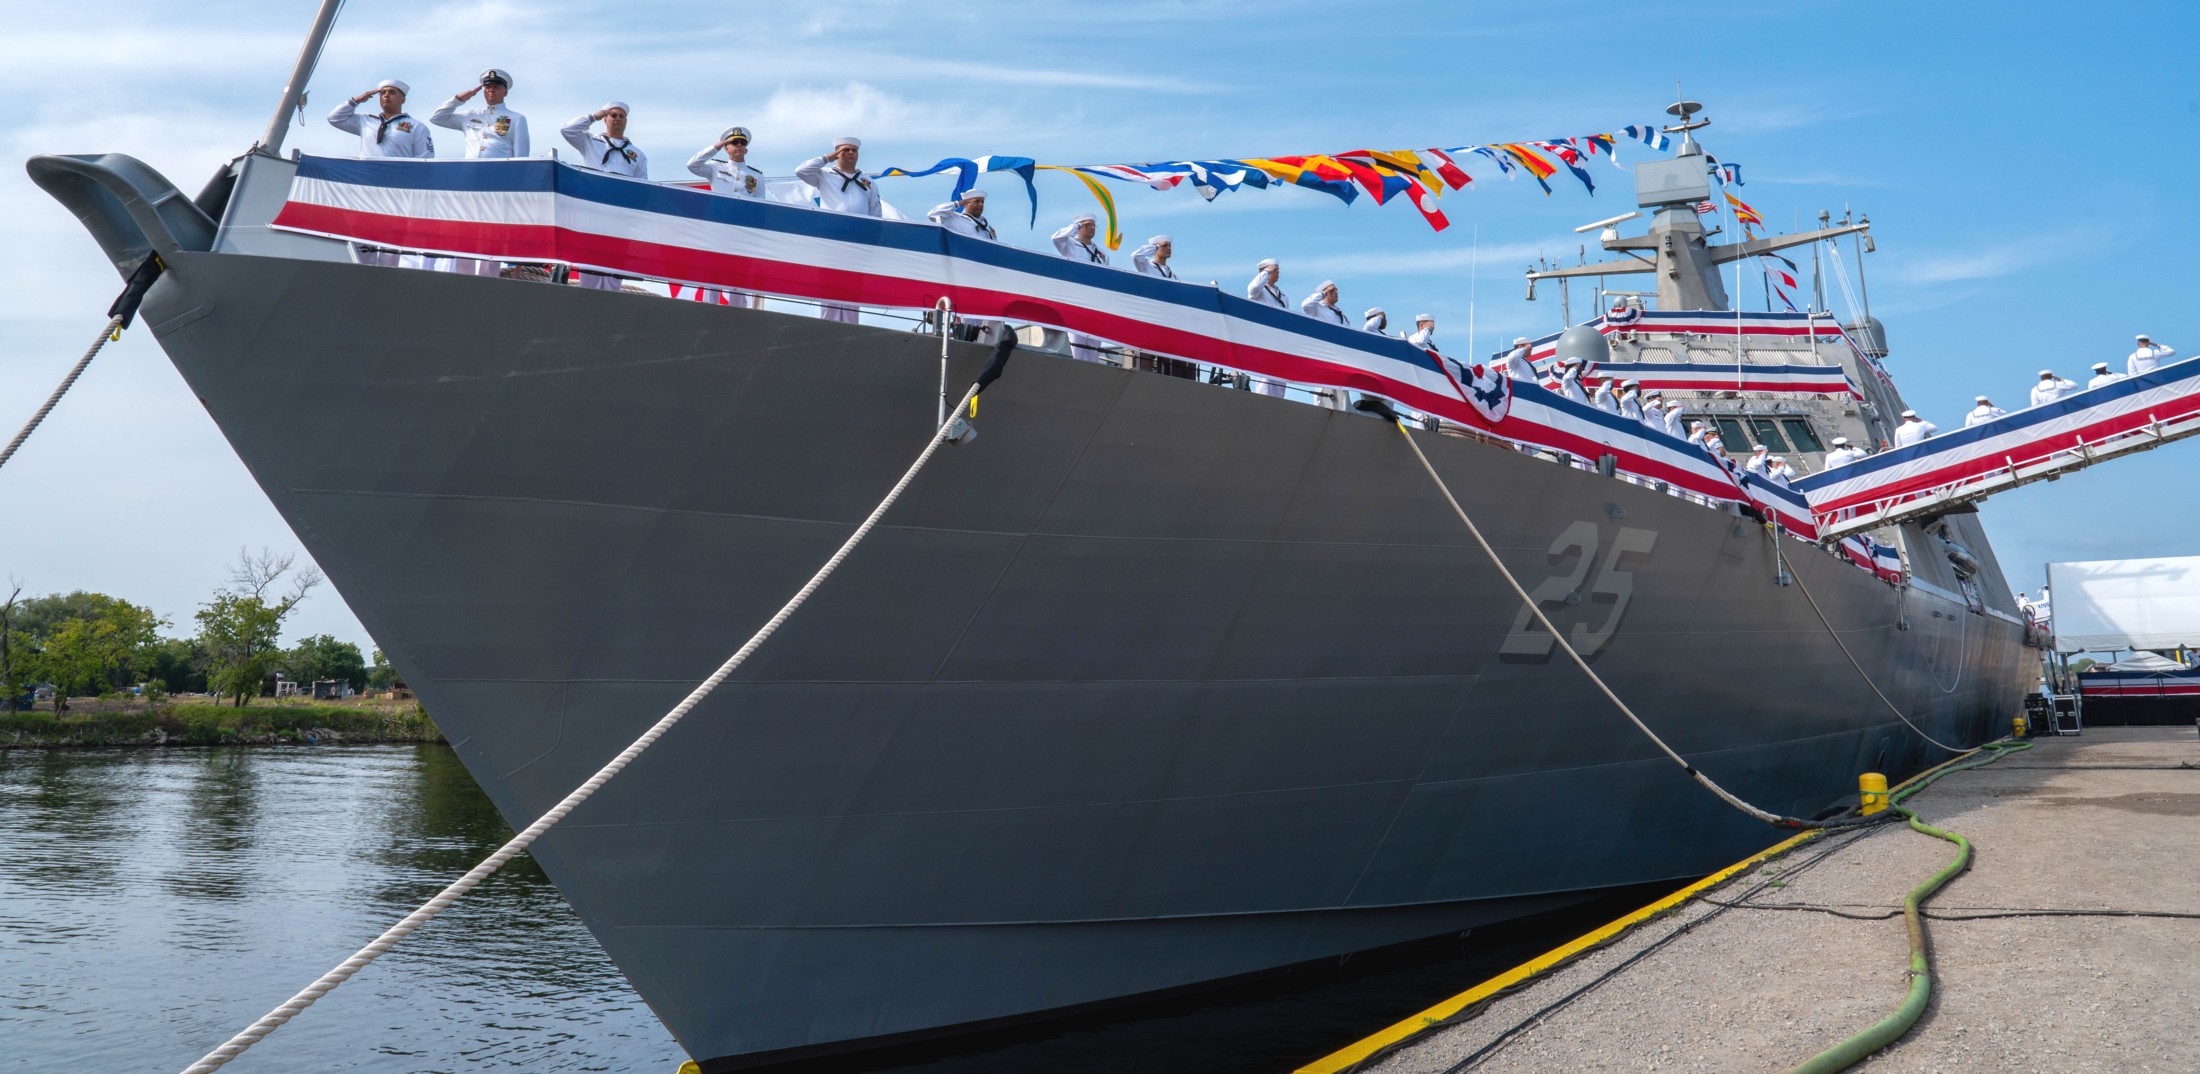 lcs-25 uss marinette freedom class littoral combat ship us navy commissioning ceremony menominee 21